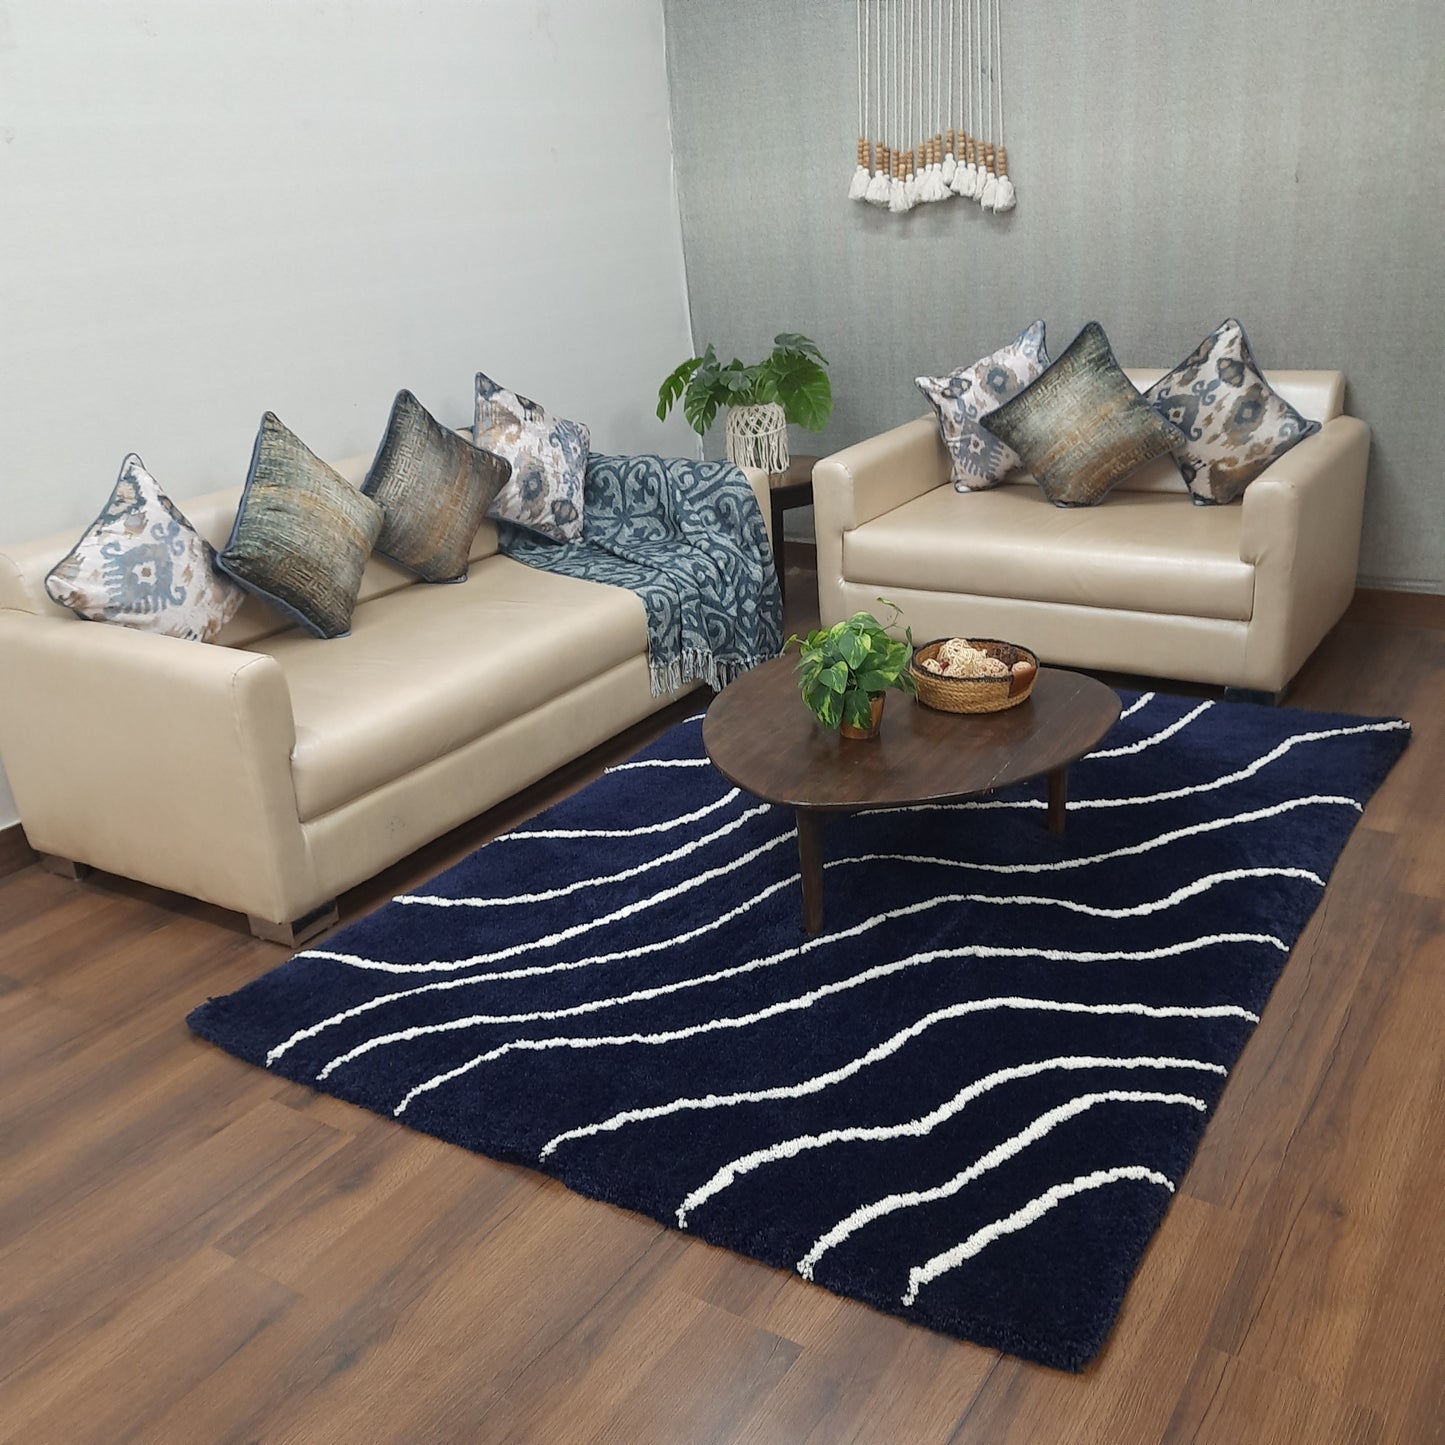 Avioni Home Atlas Collection - Plush Soft Washable Wave Design Carpet In Navy Blue & White| Soft, Carpet Backing, Easy to Clean